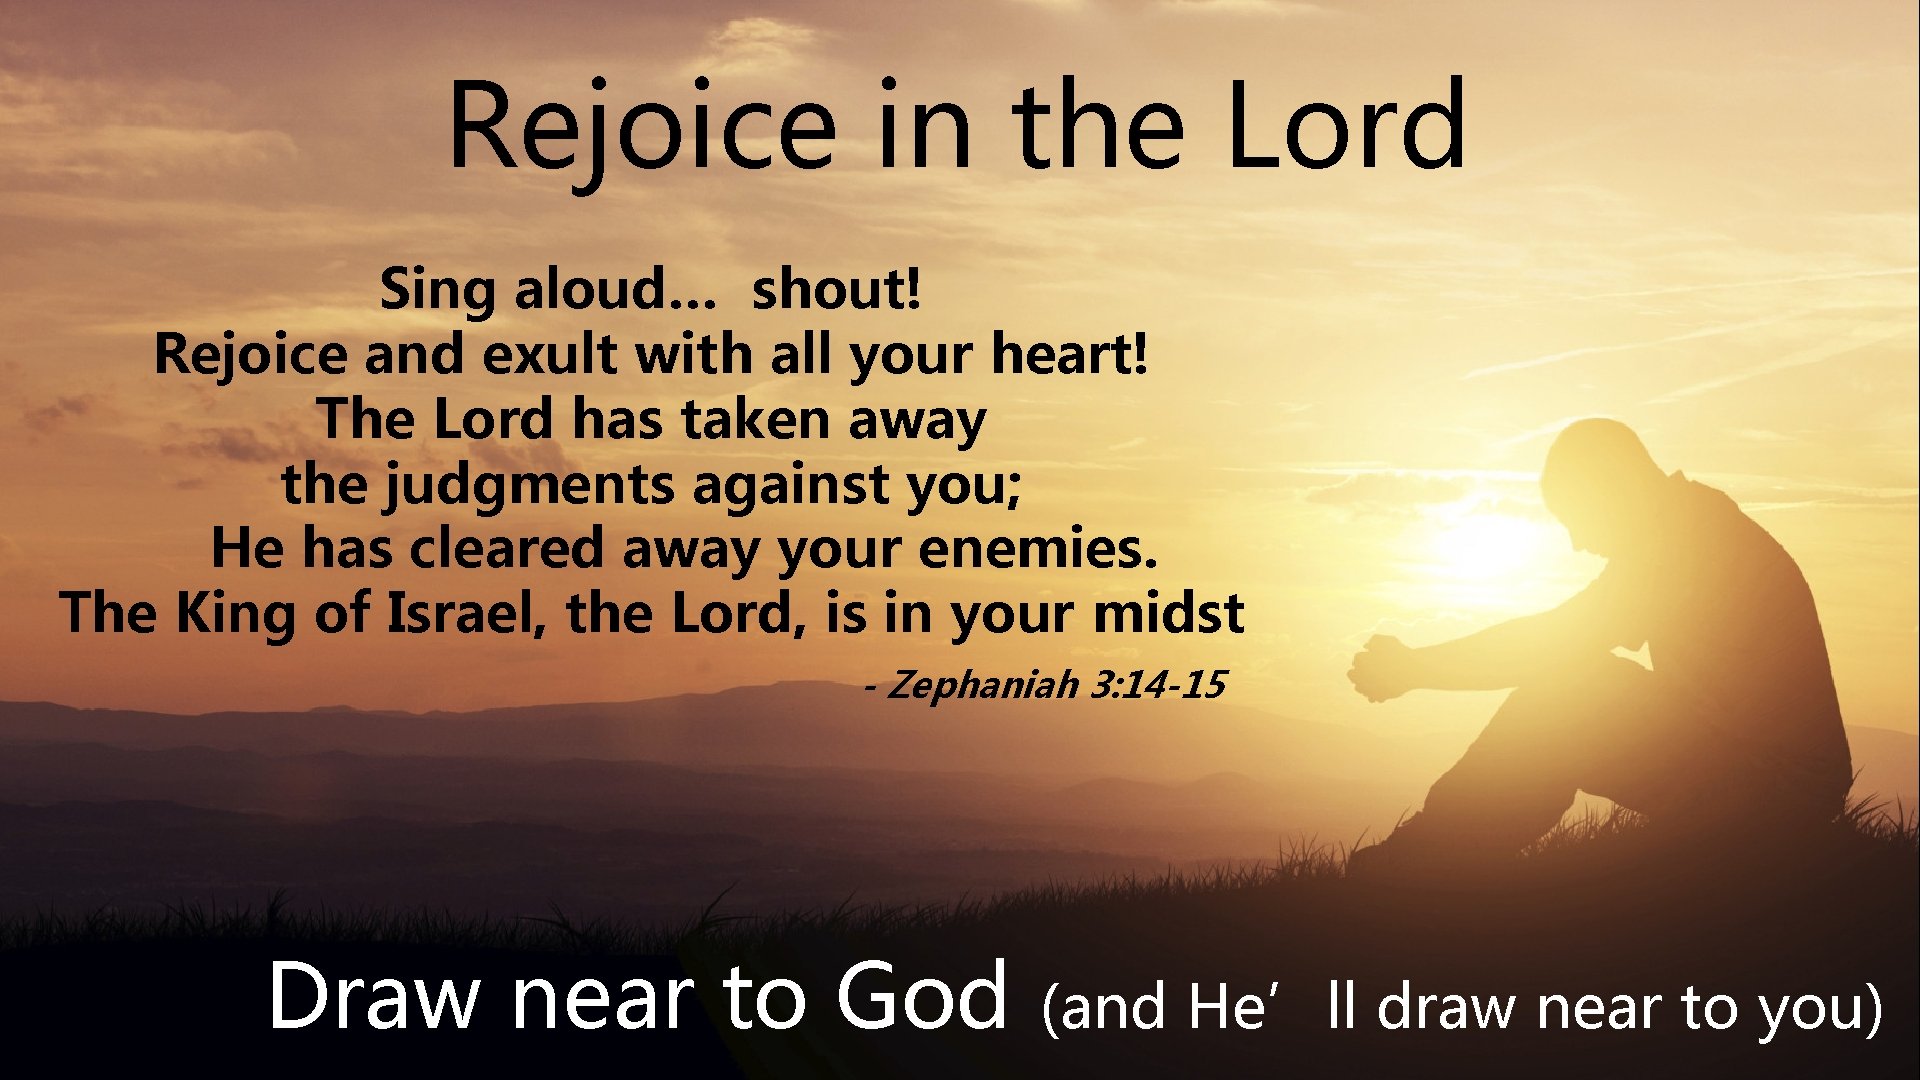 Rejoice in the Lord Sing aloud… shout! Rejoice and exult with all your heart!